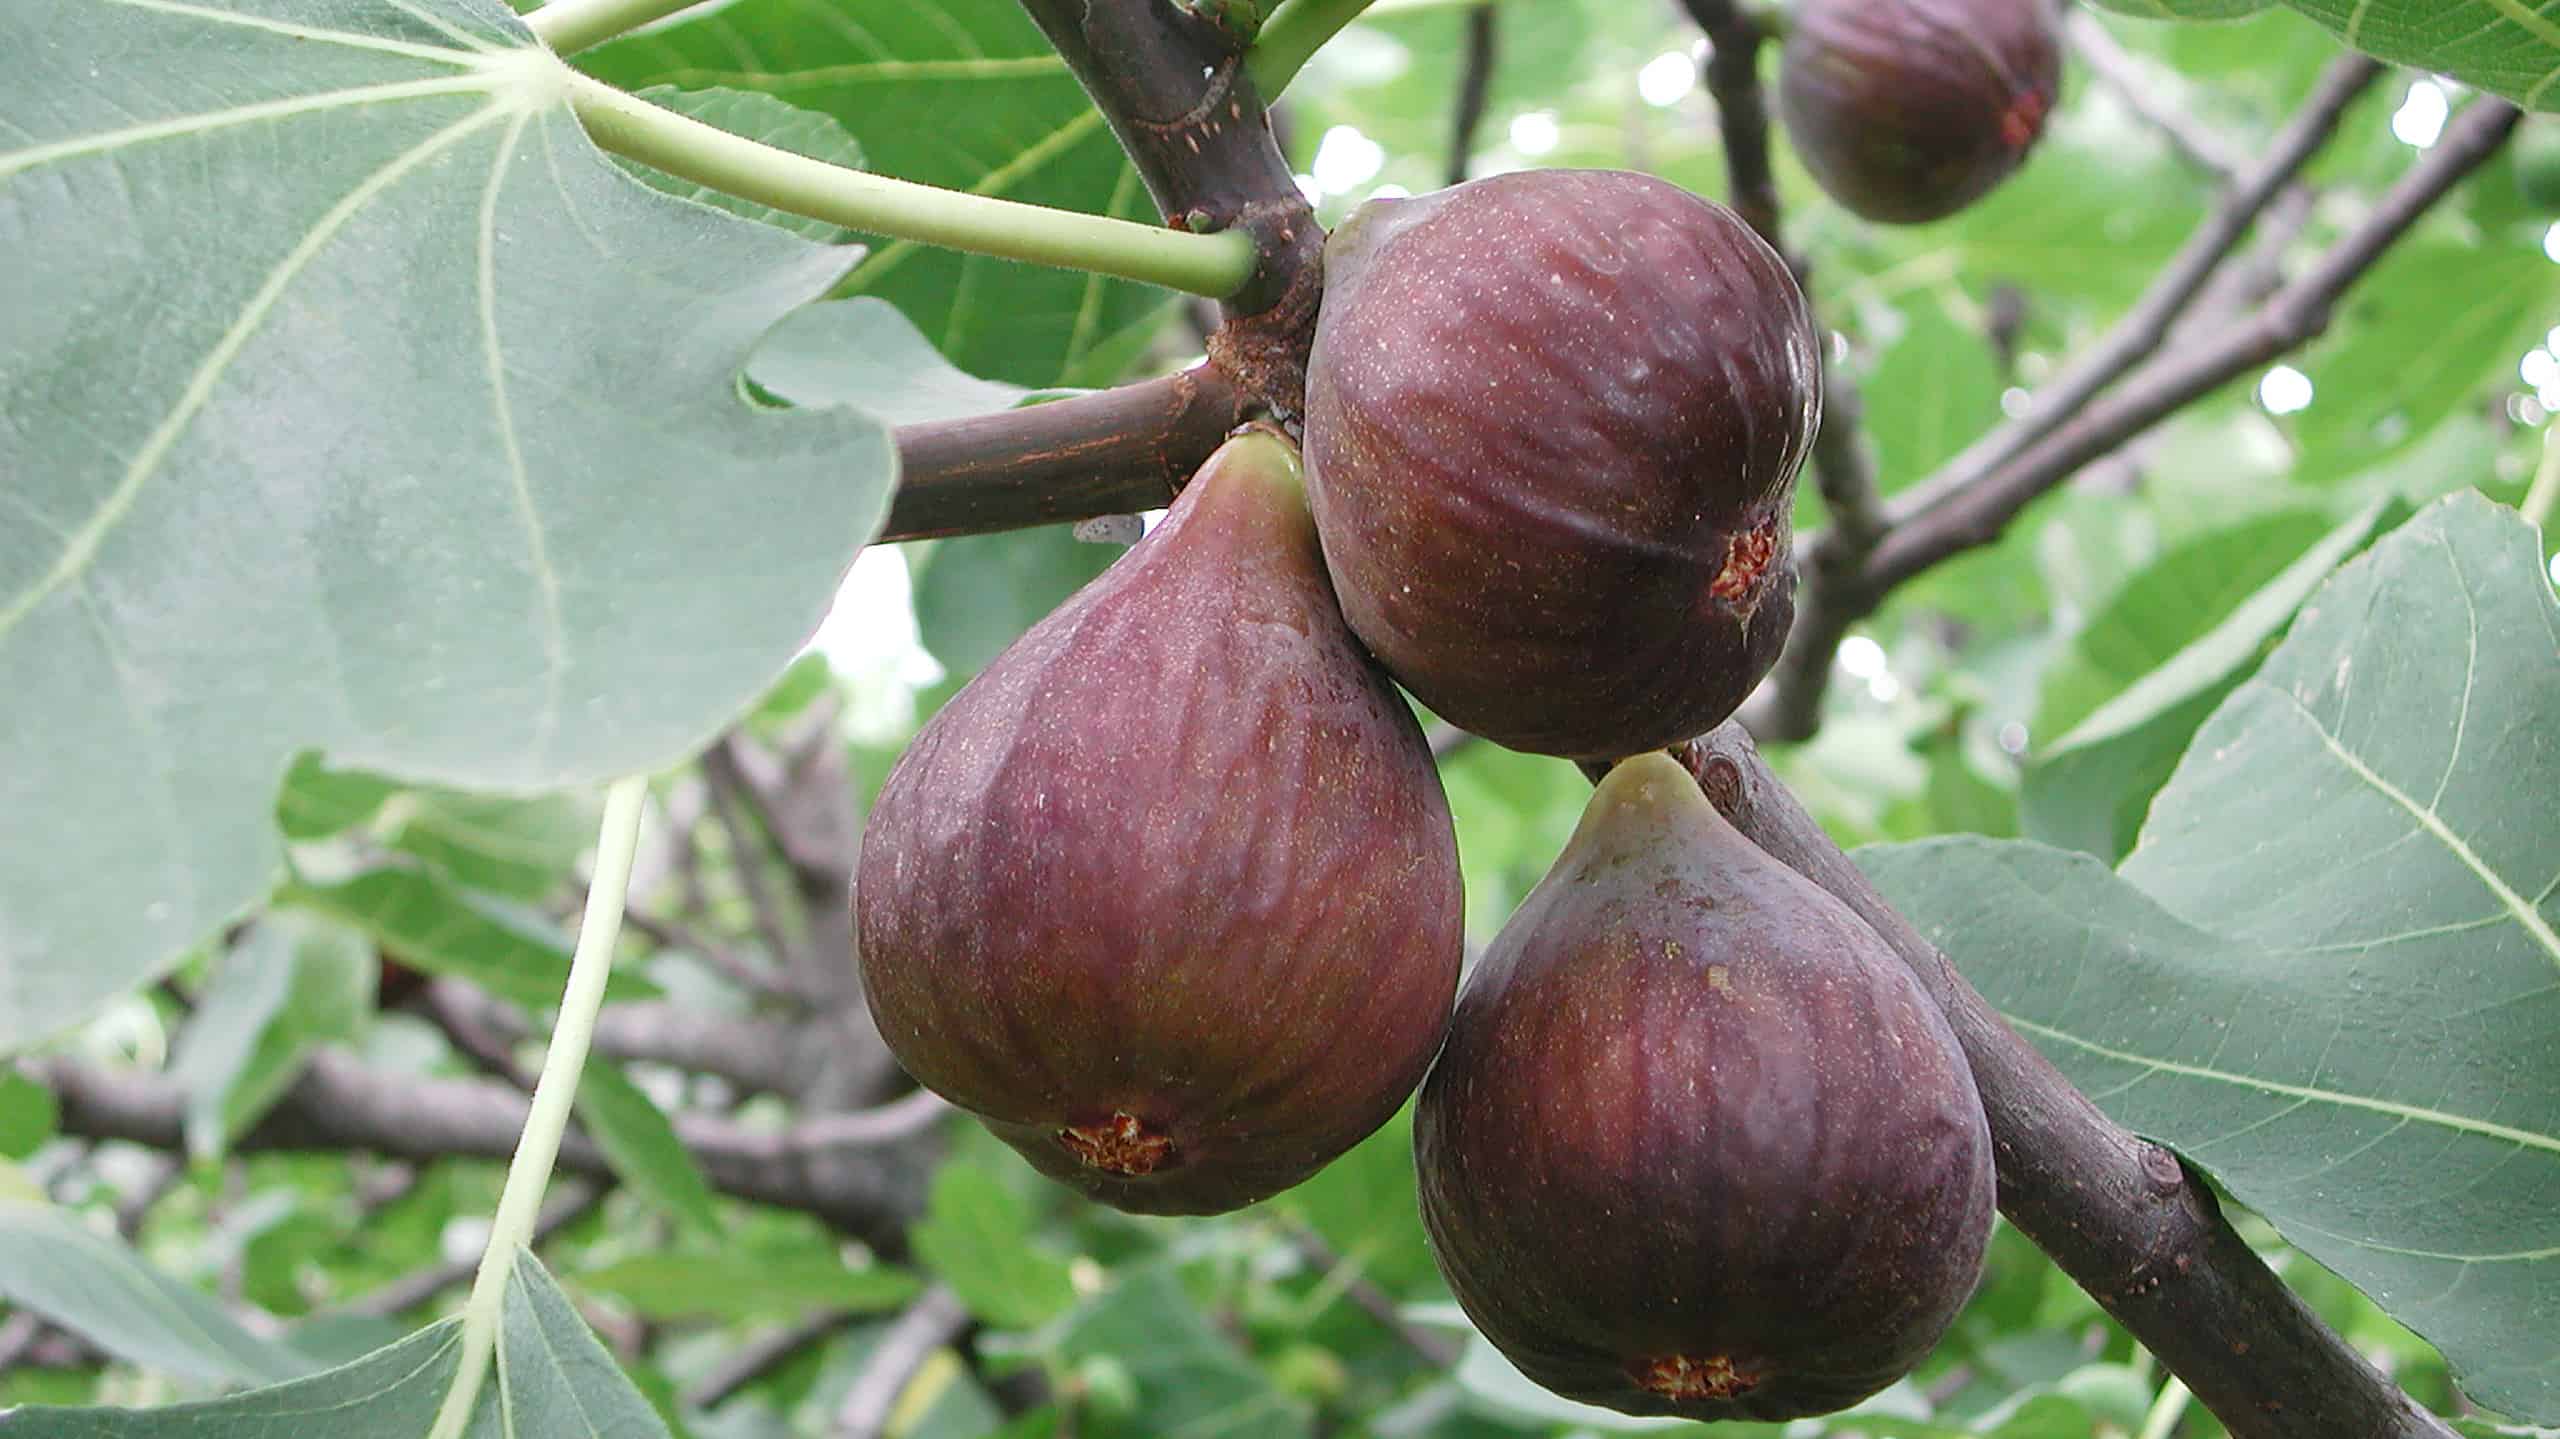 How to harvest figs – step-by-step